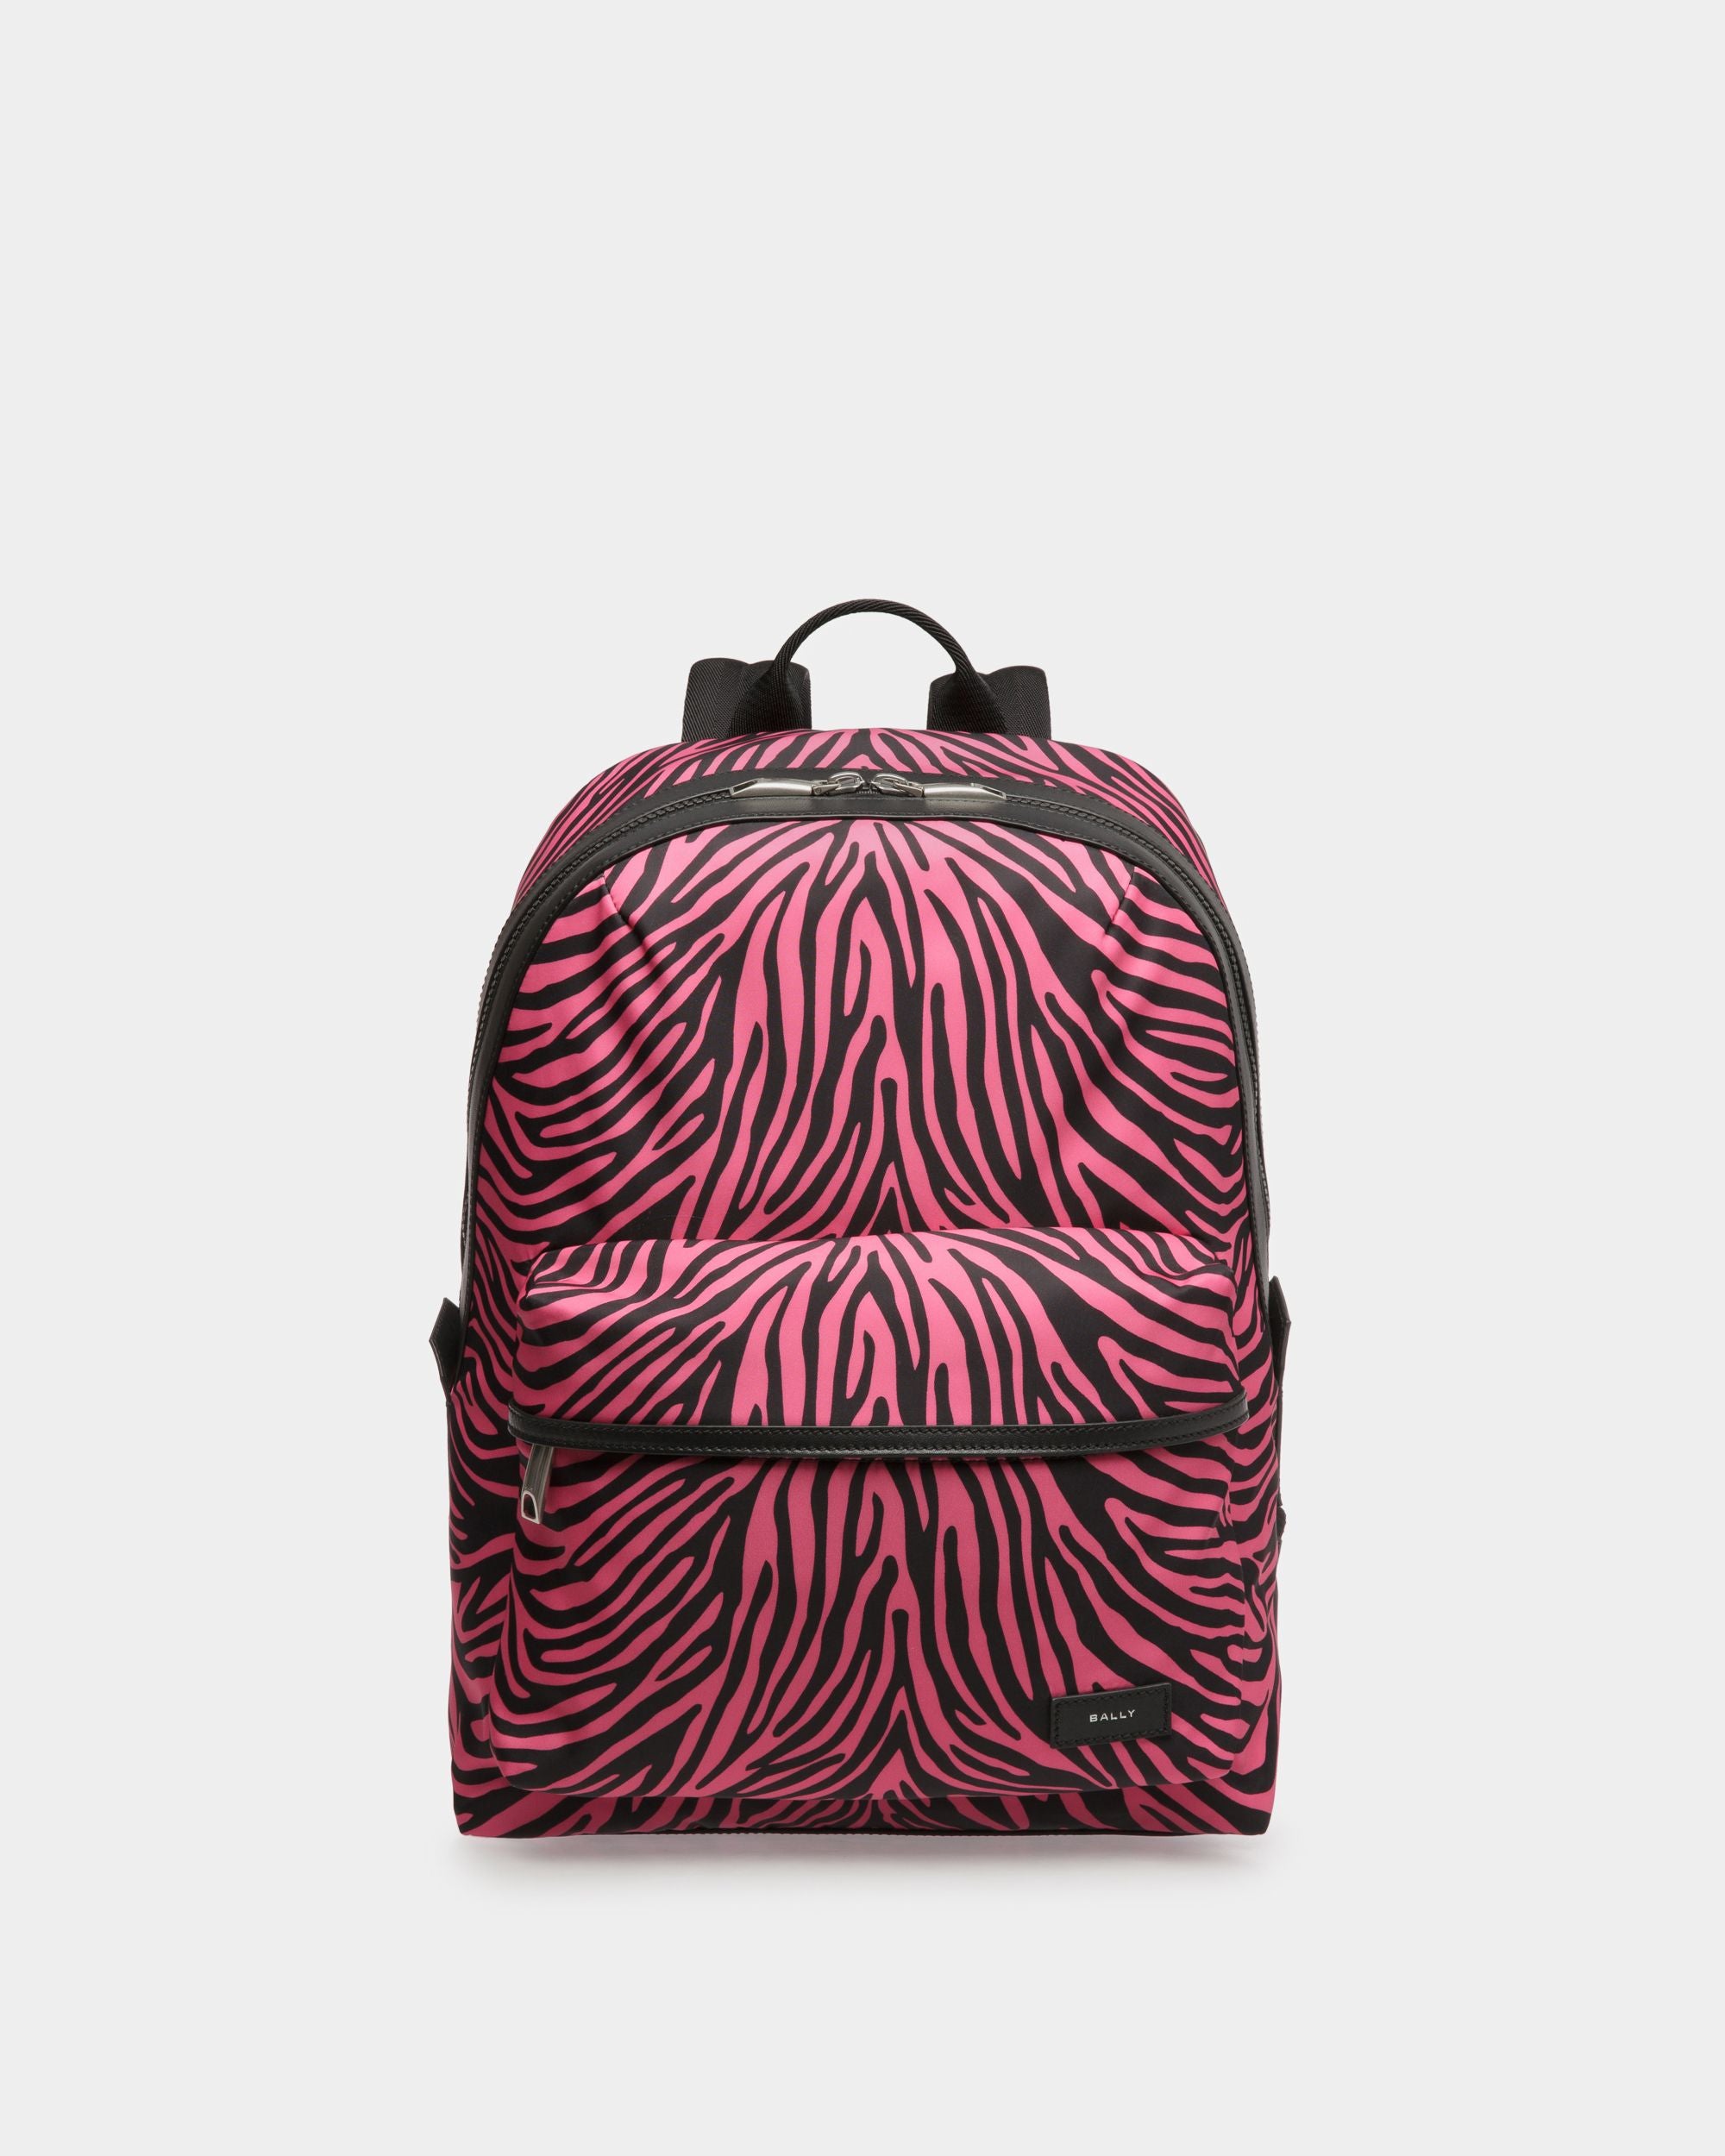 Trekking | Men's Backpack | Pink And Black Fabric And Nylon | Bally | Still Life Front